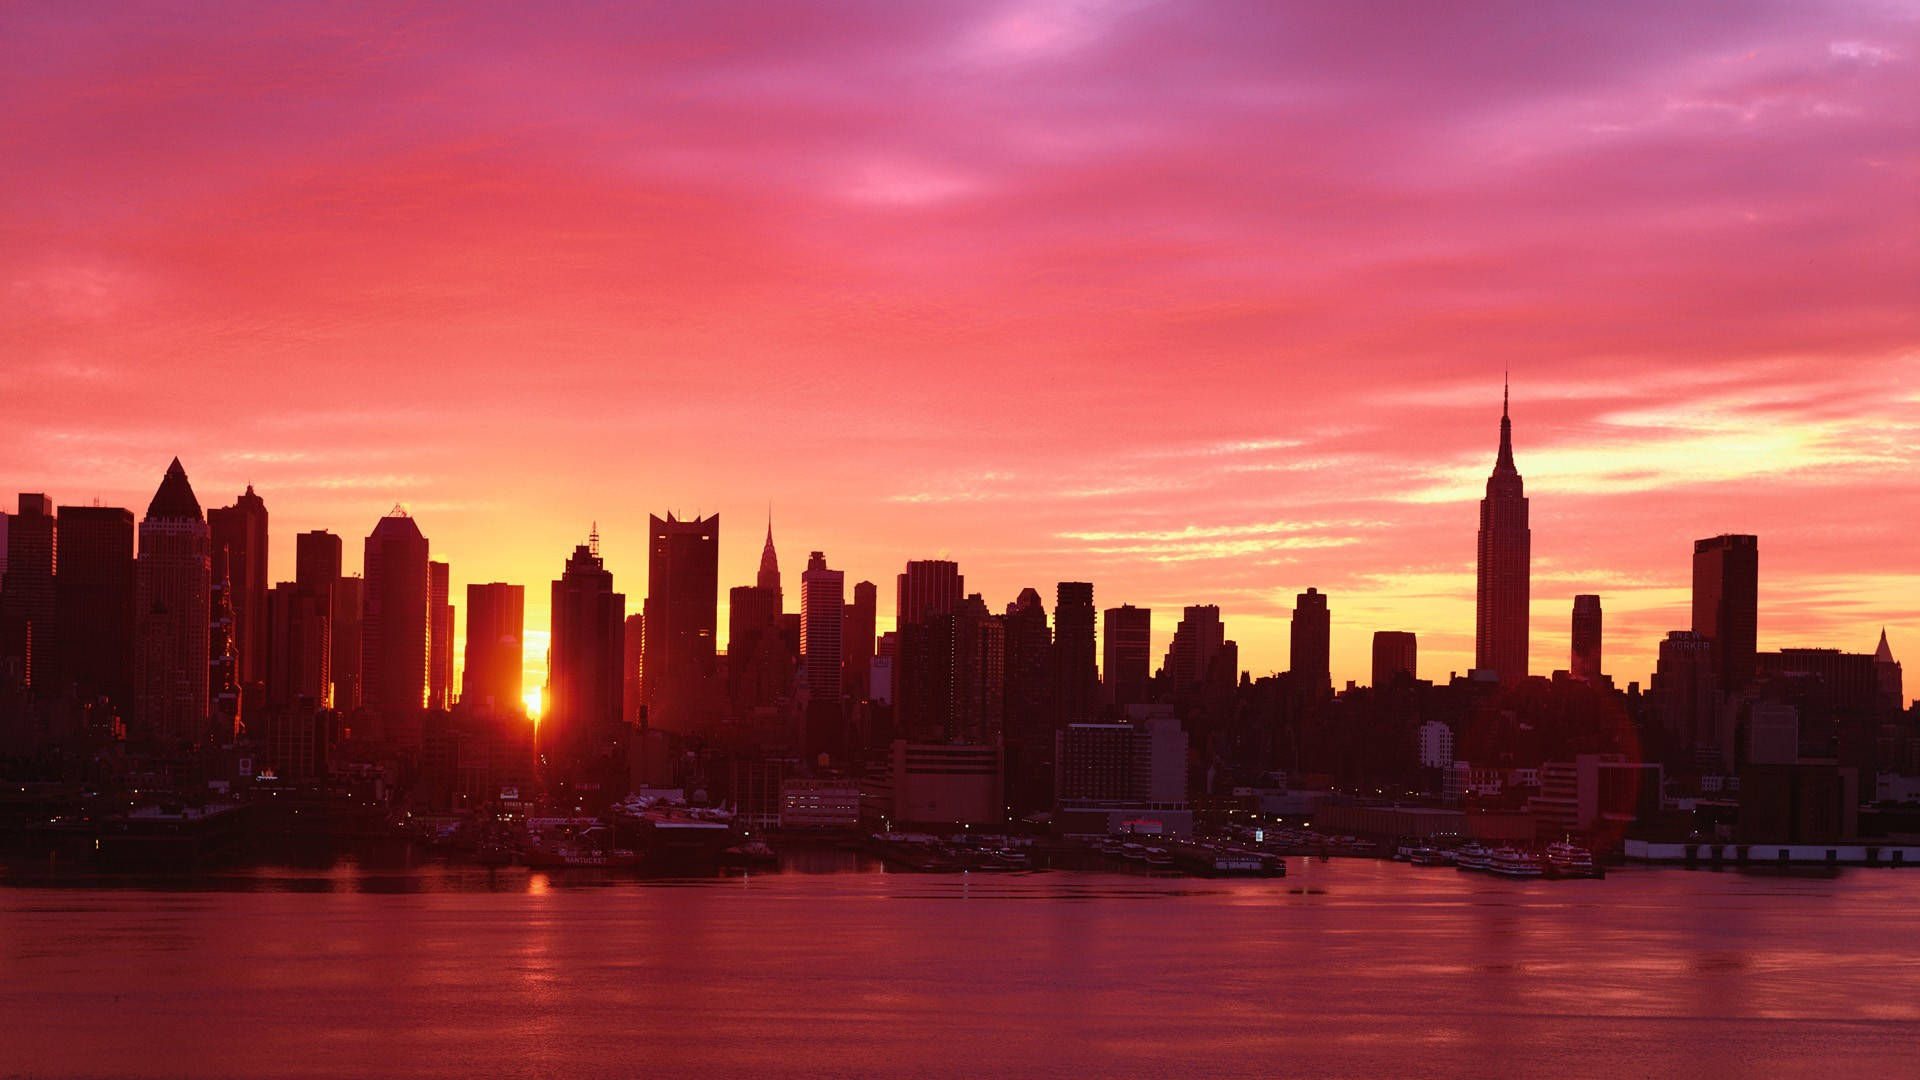 Sunset Silhouettes Of New York Computer Wallpaper